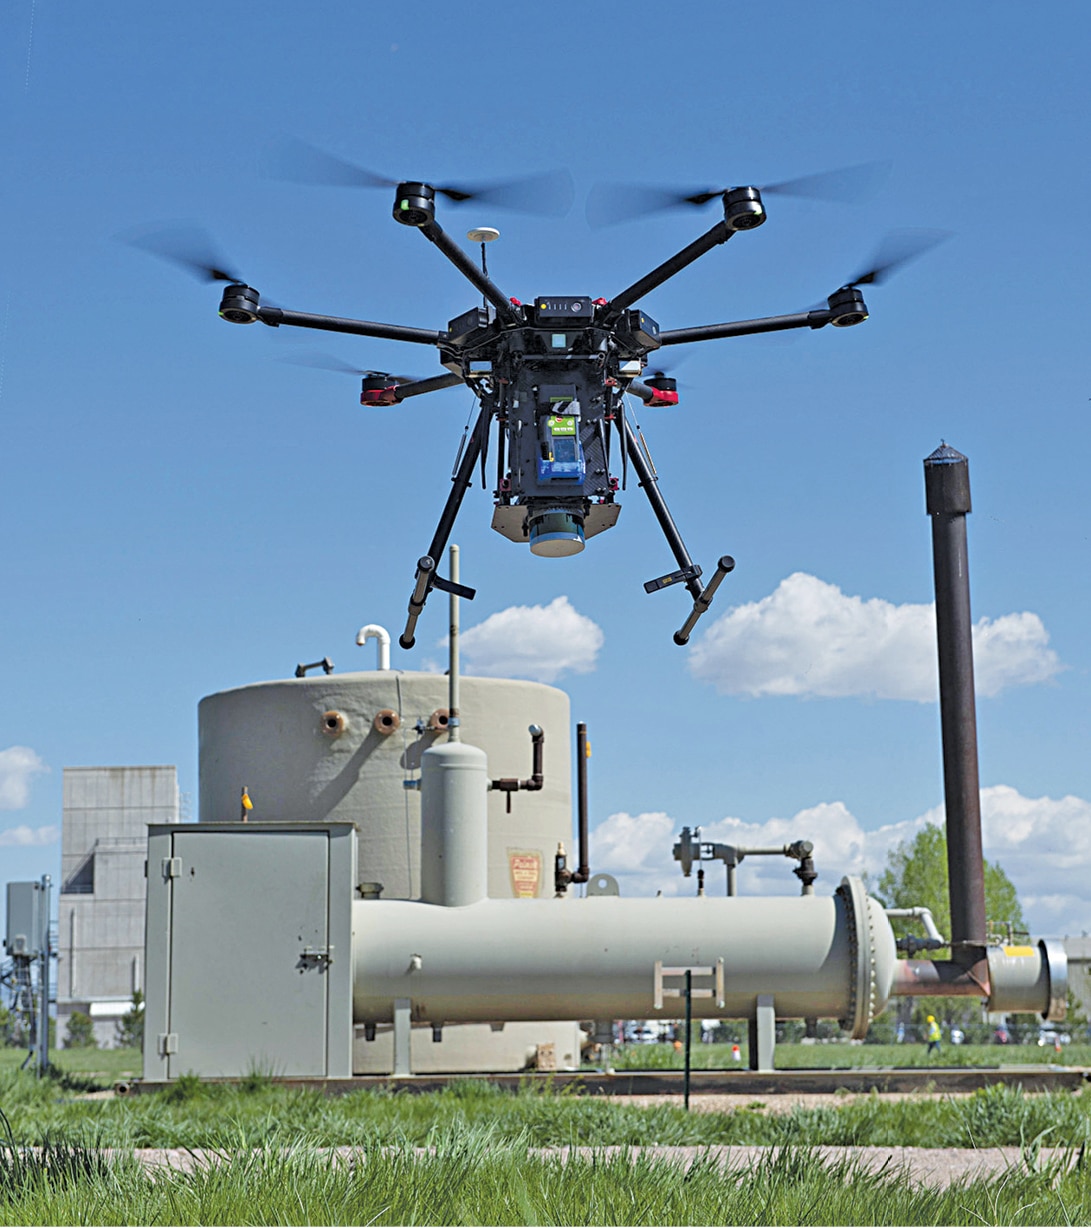 Drone Based Measurement And Drones’ Certification